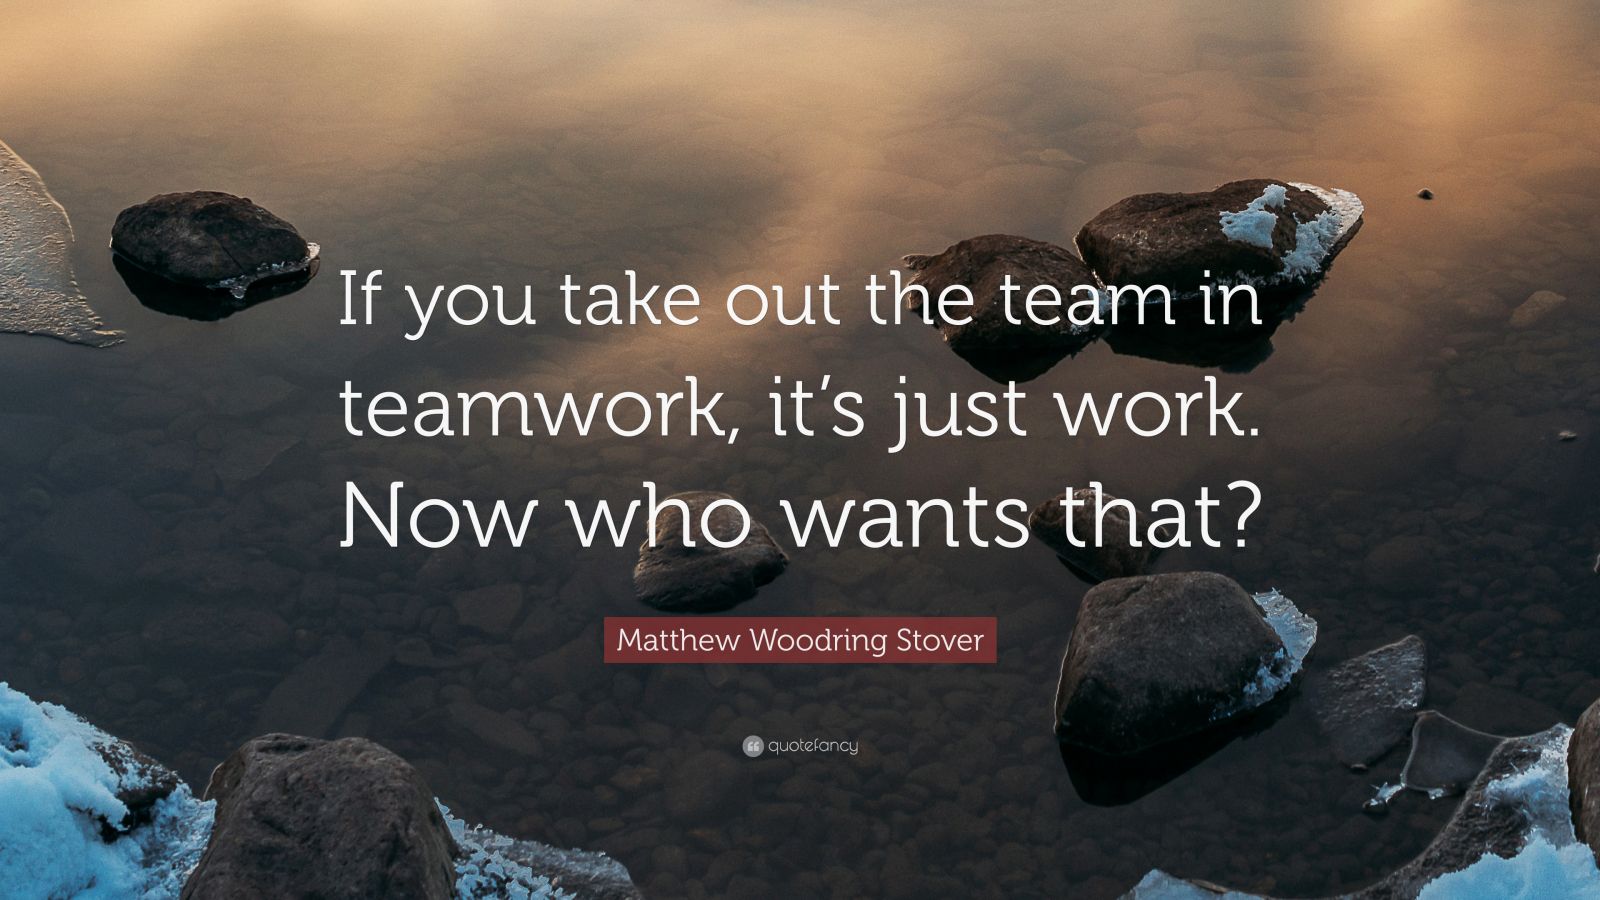 Matthew Woodring Stover Quote: “If you take out the team in teamwork ...